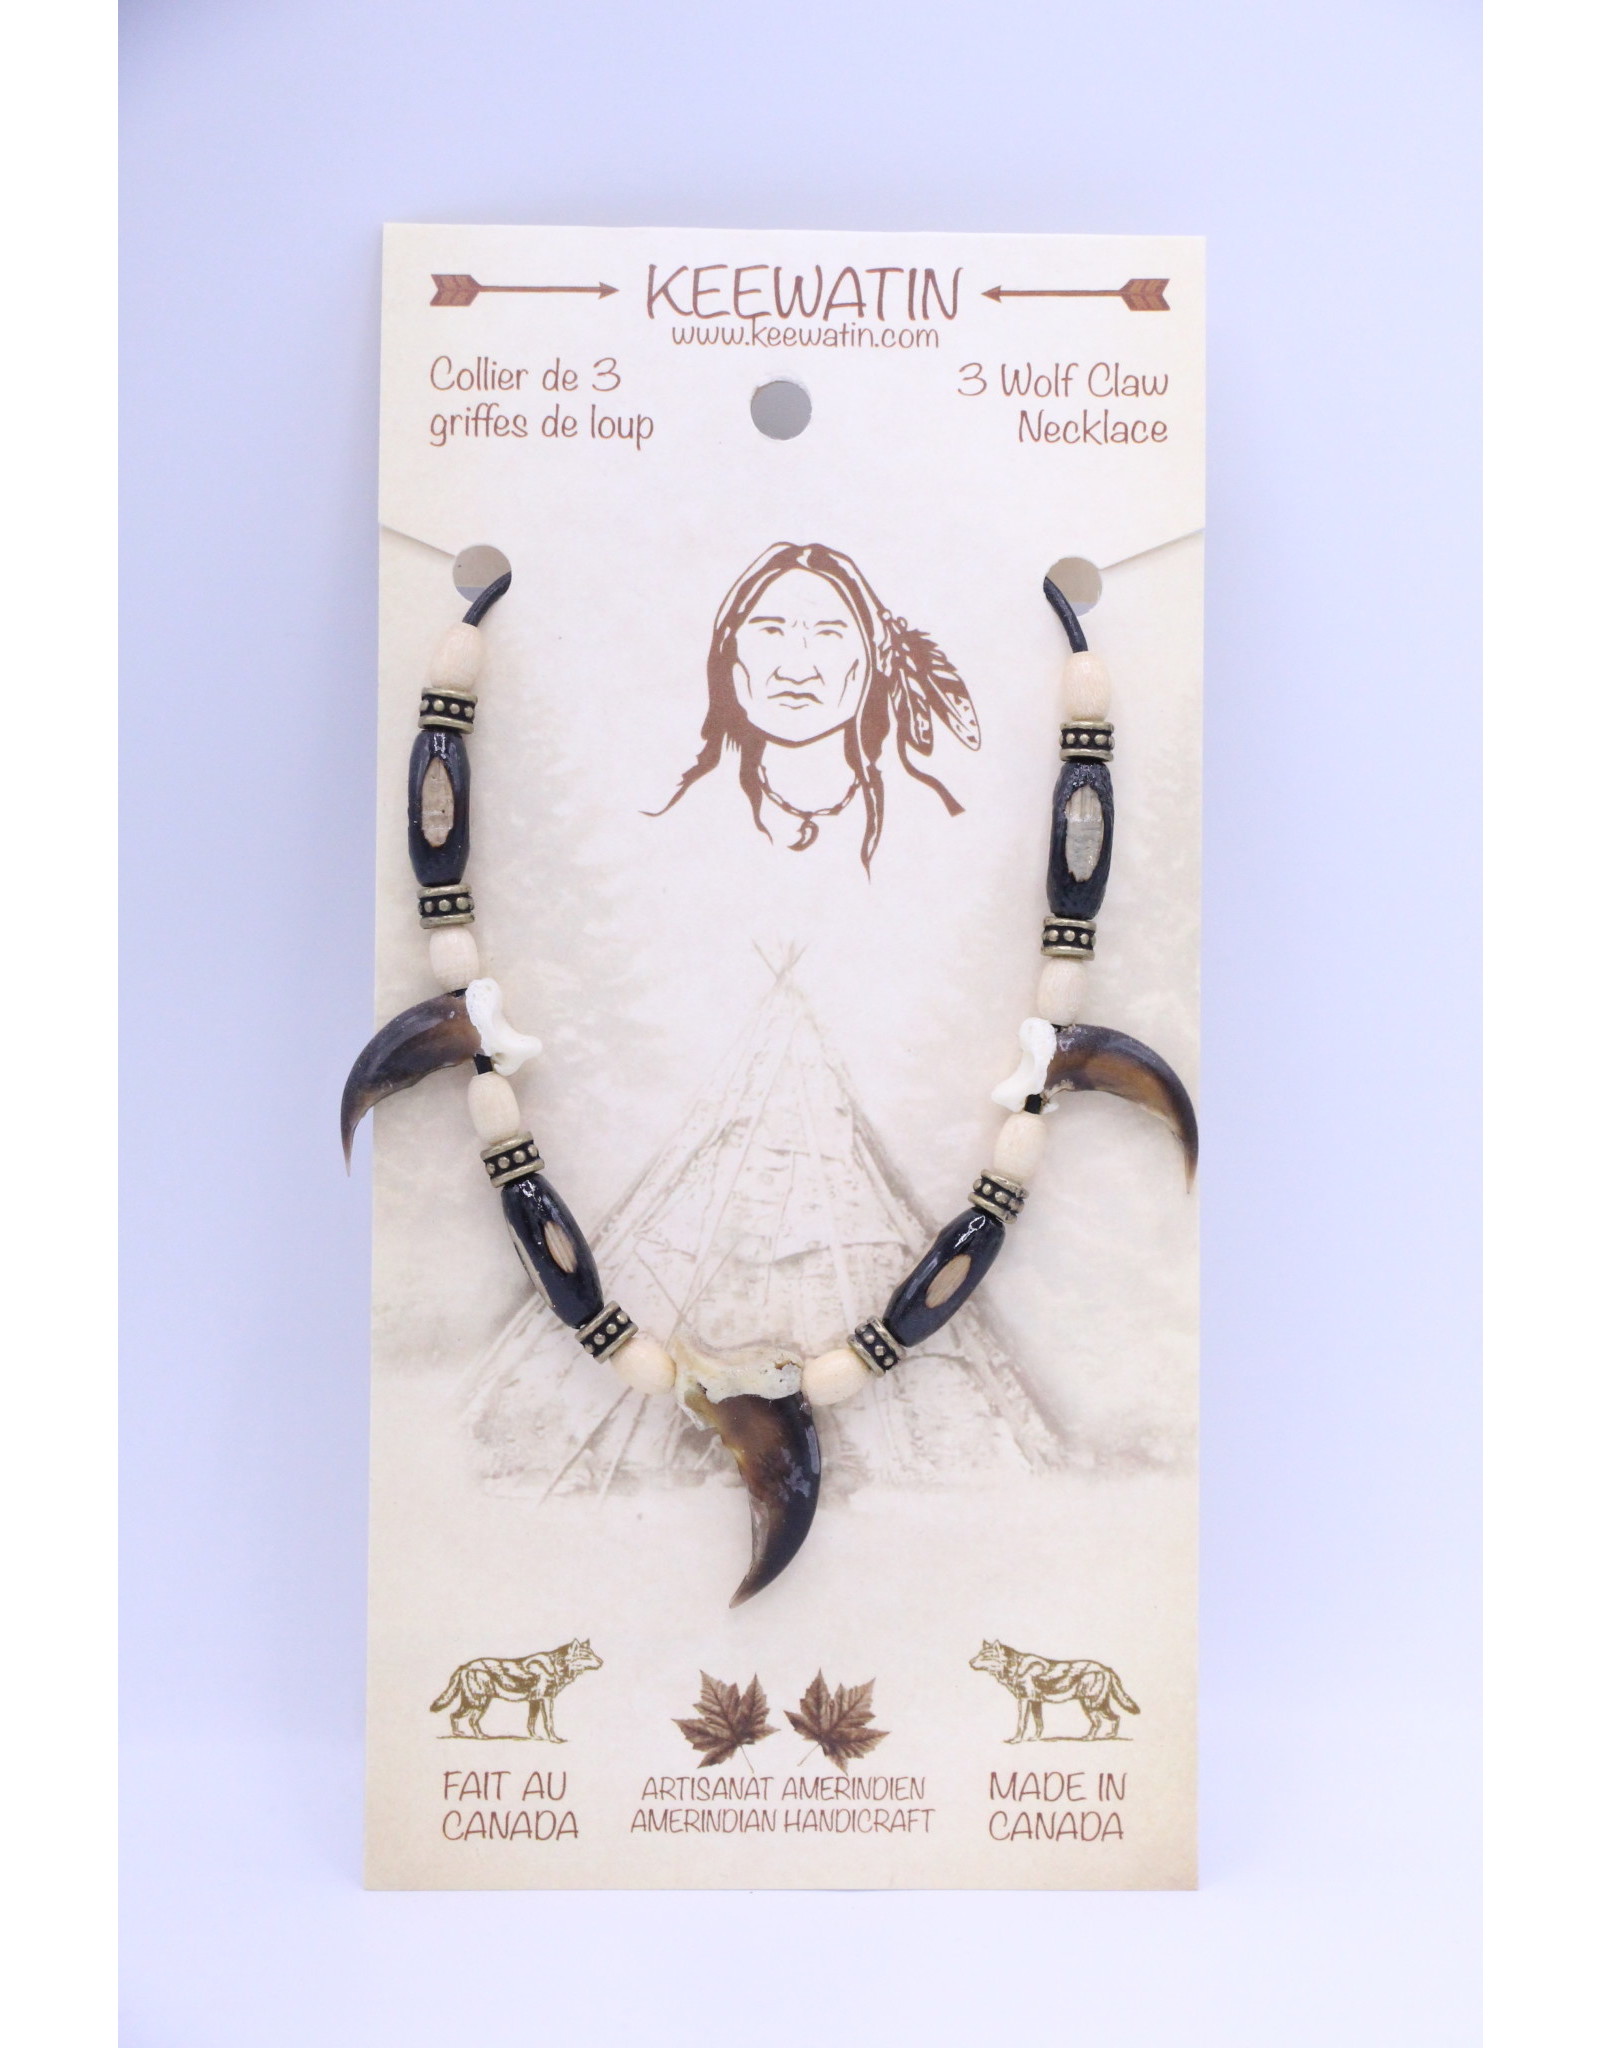 3 Wolf Claw Necklace (Amerindian Necklaces K)